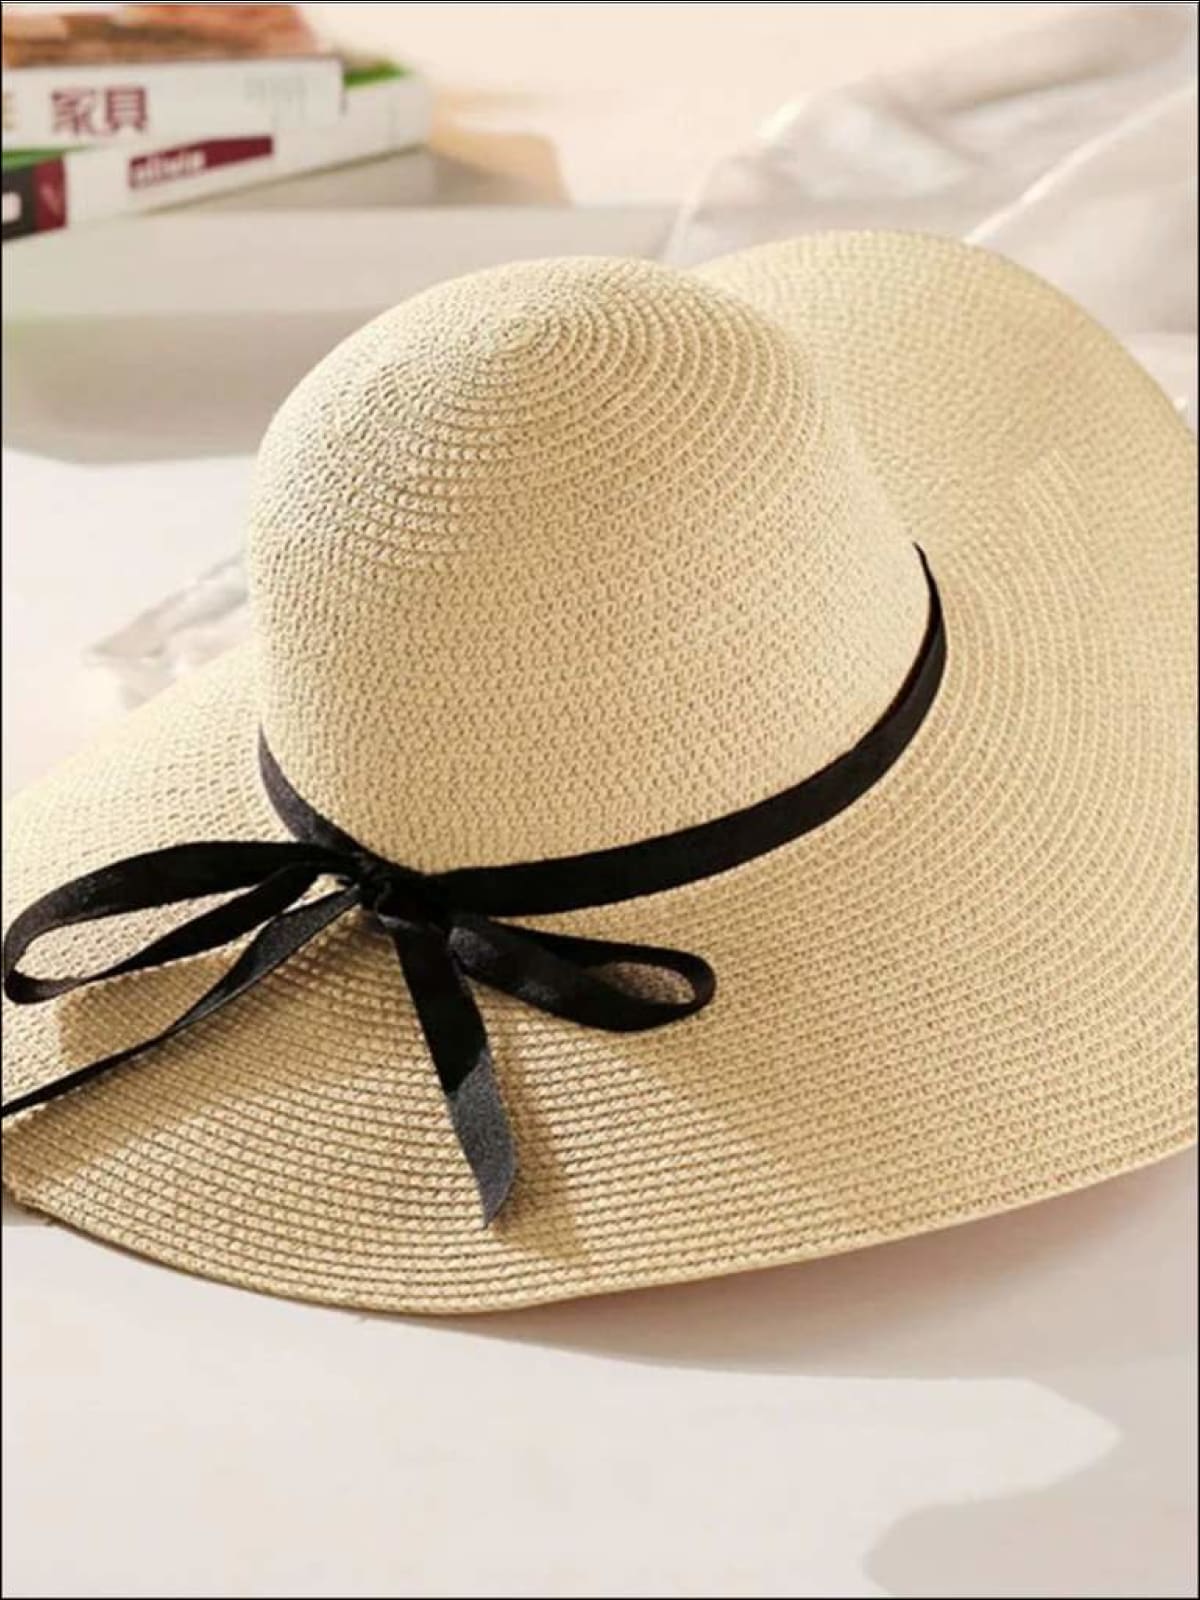 Womens Wide Brim Straw Hat with Black Ribbon (6 Color Options), Beige